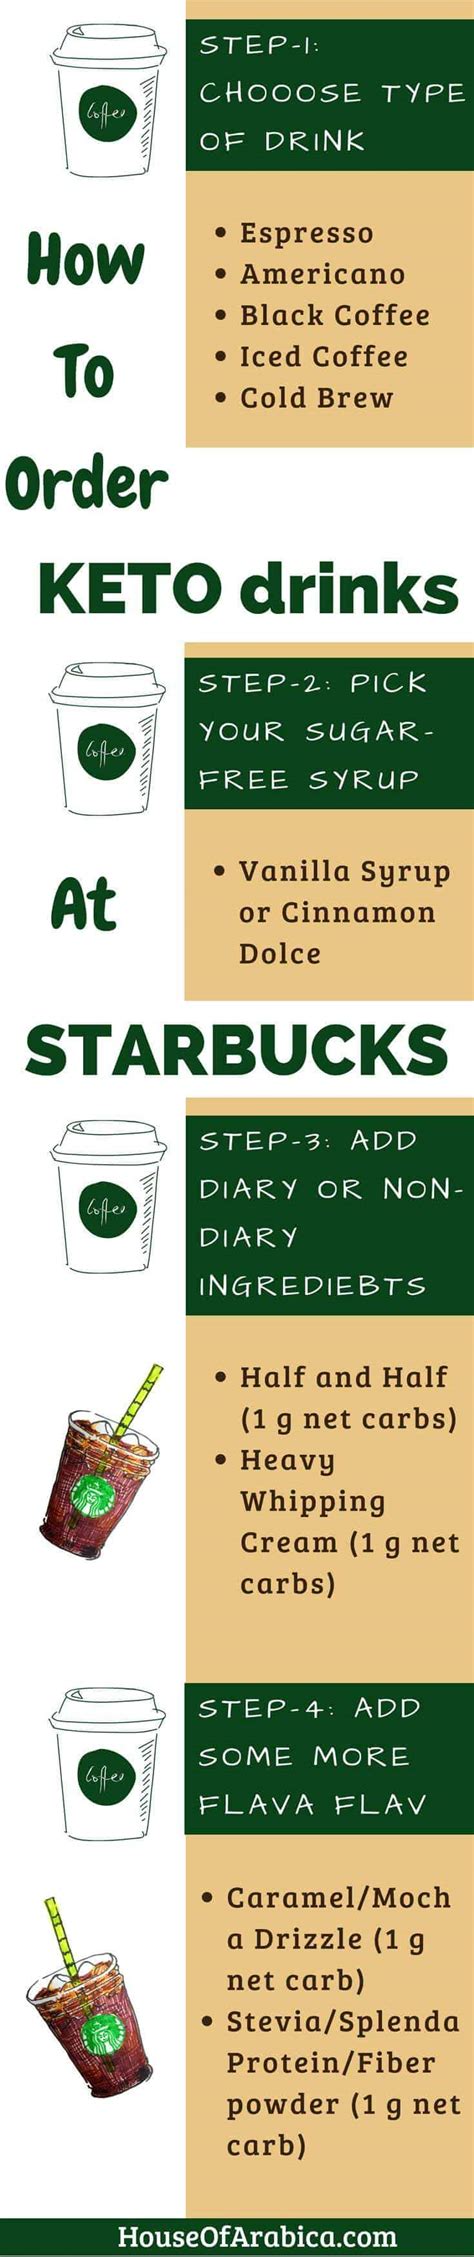 4 Awesome Keto Drinks At Starbucks How To Order House Of Arabica